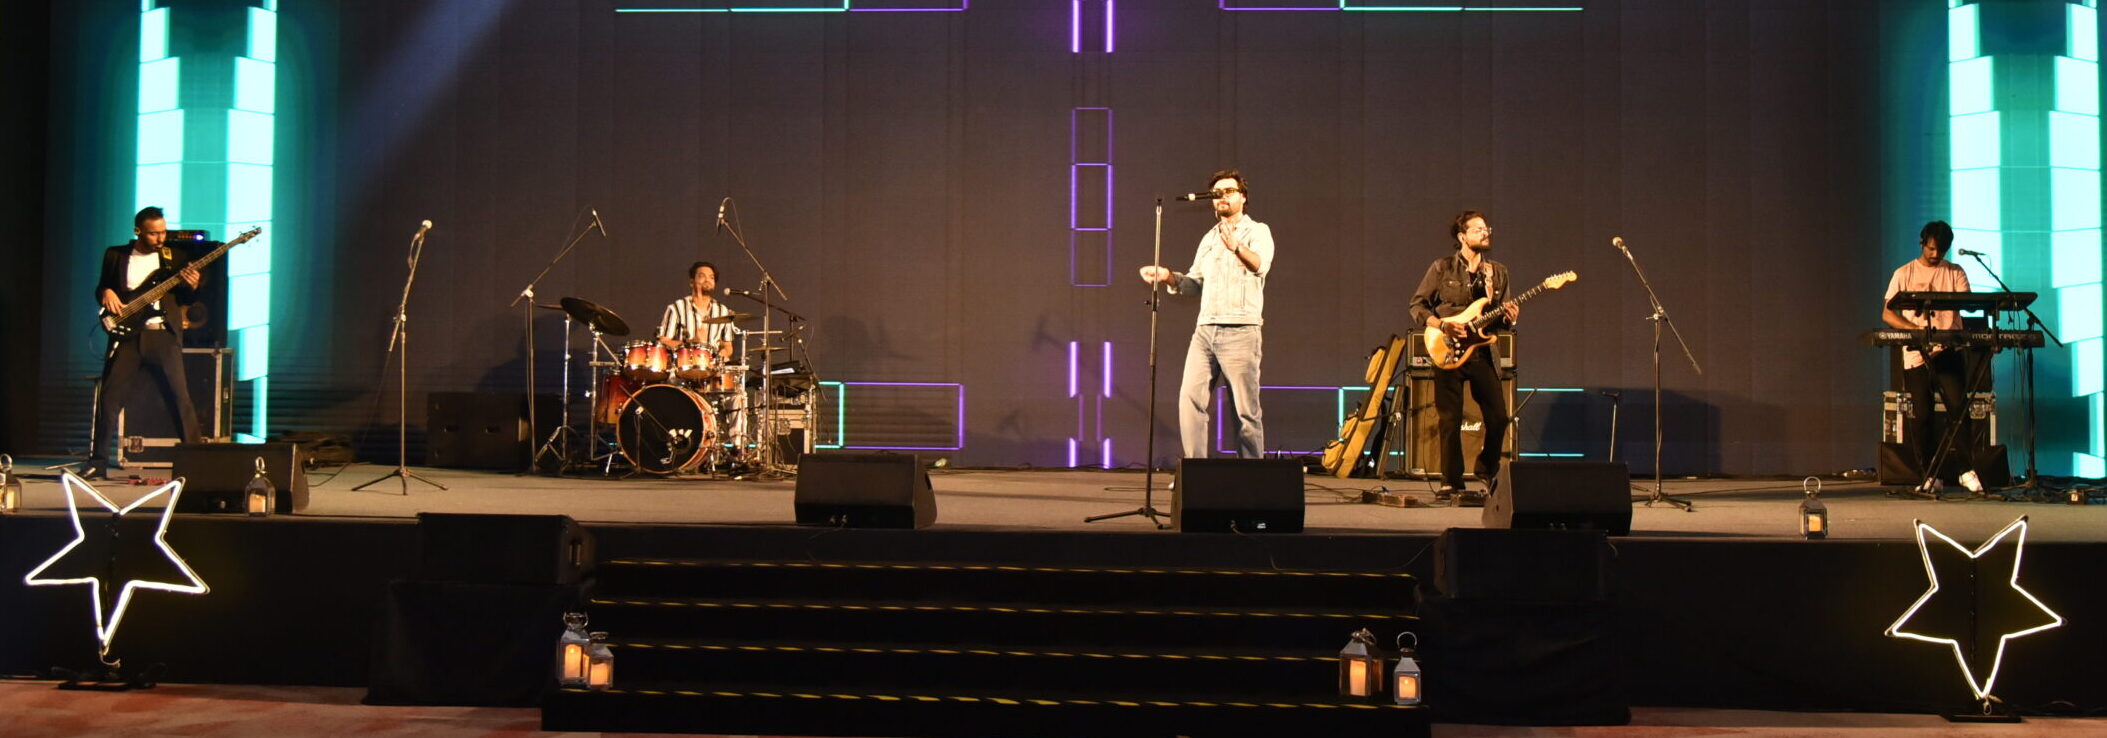 Aakhira Band performing for a corporate event in Jaipur